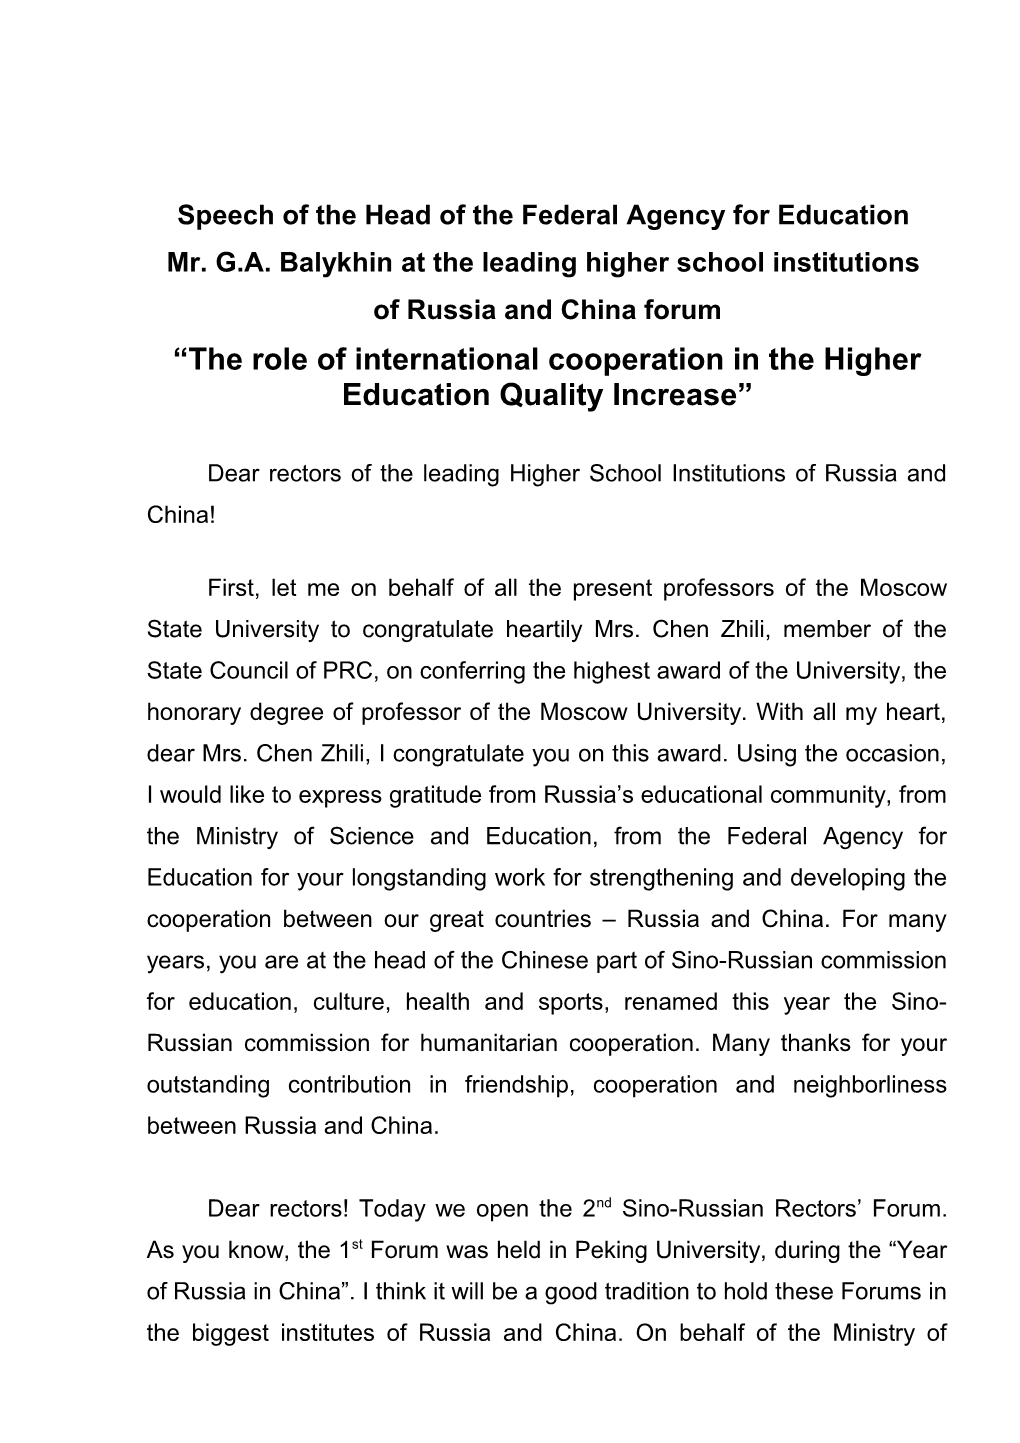 The Role of International Cooperation in the Higher Education Quality Increase